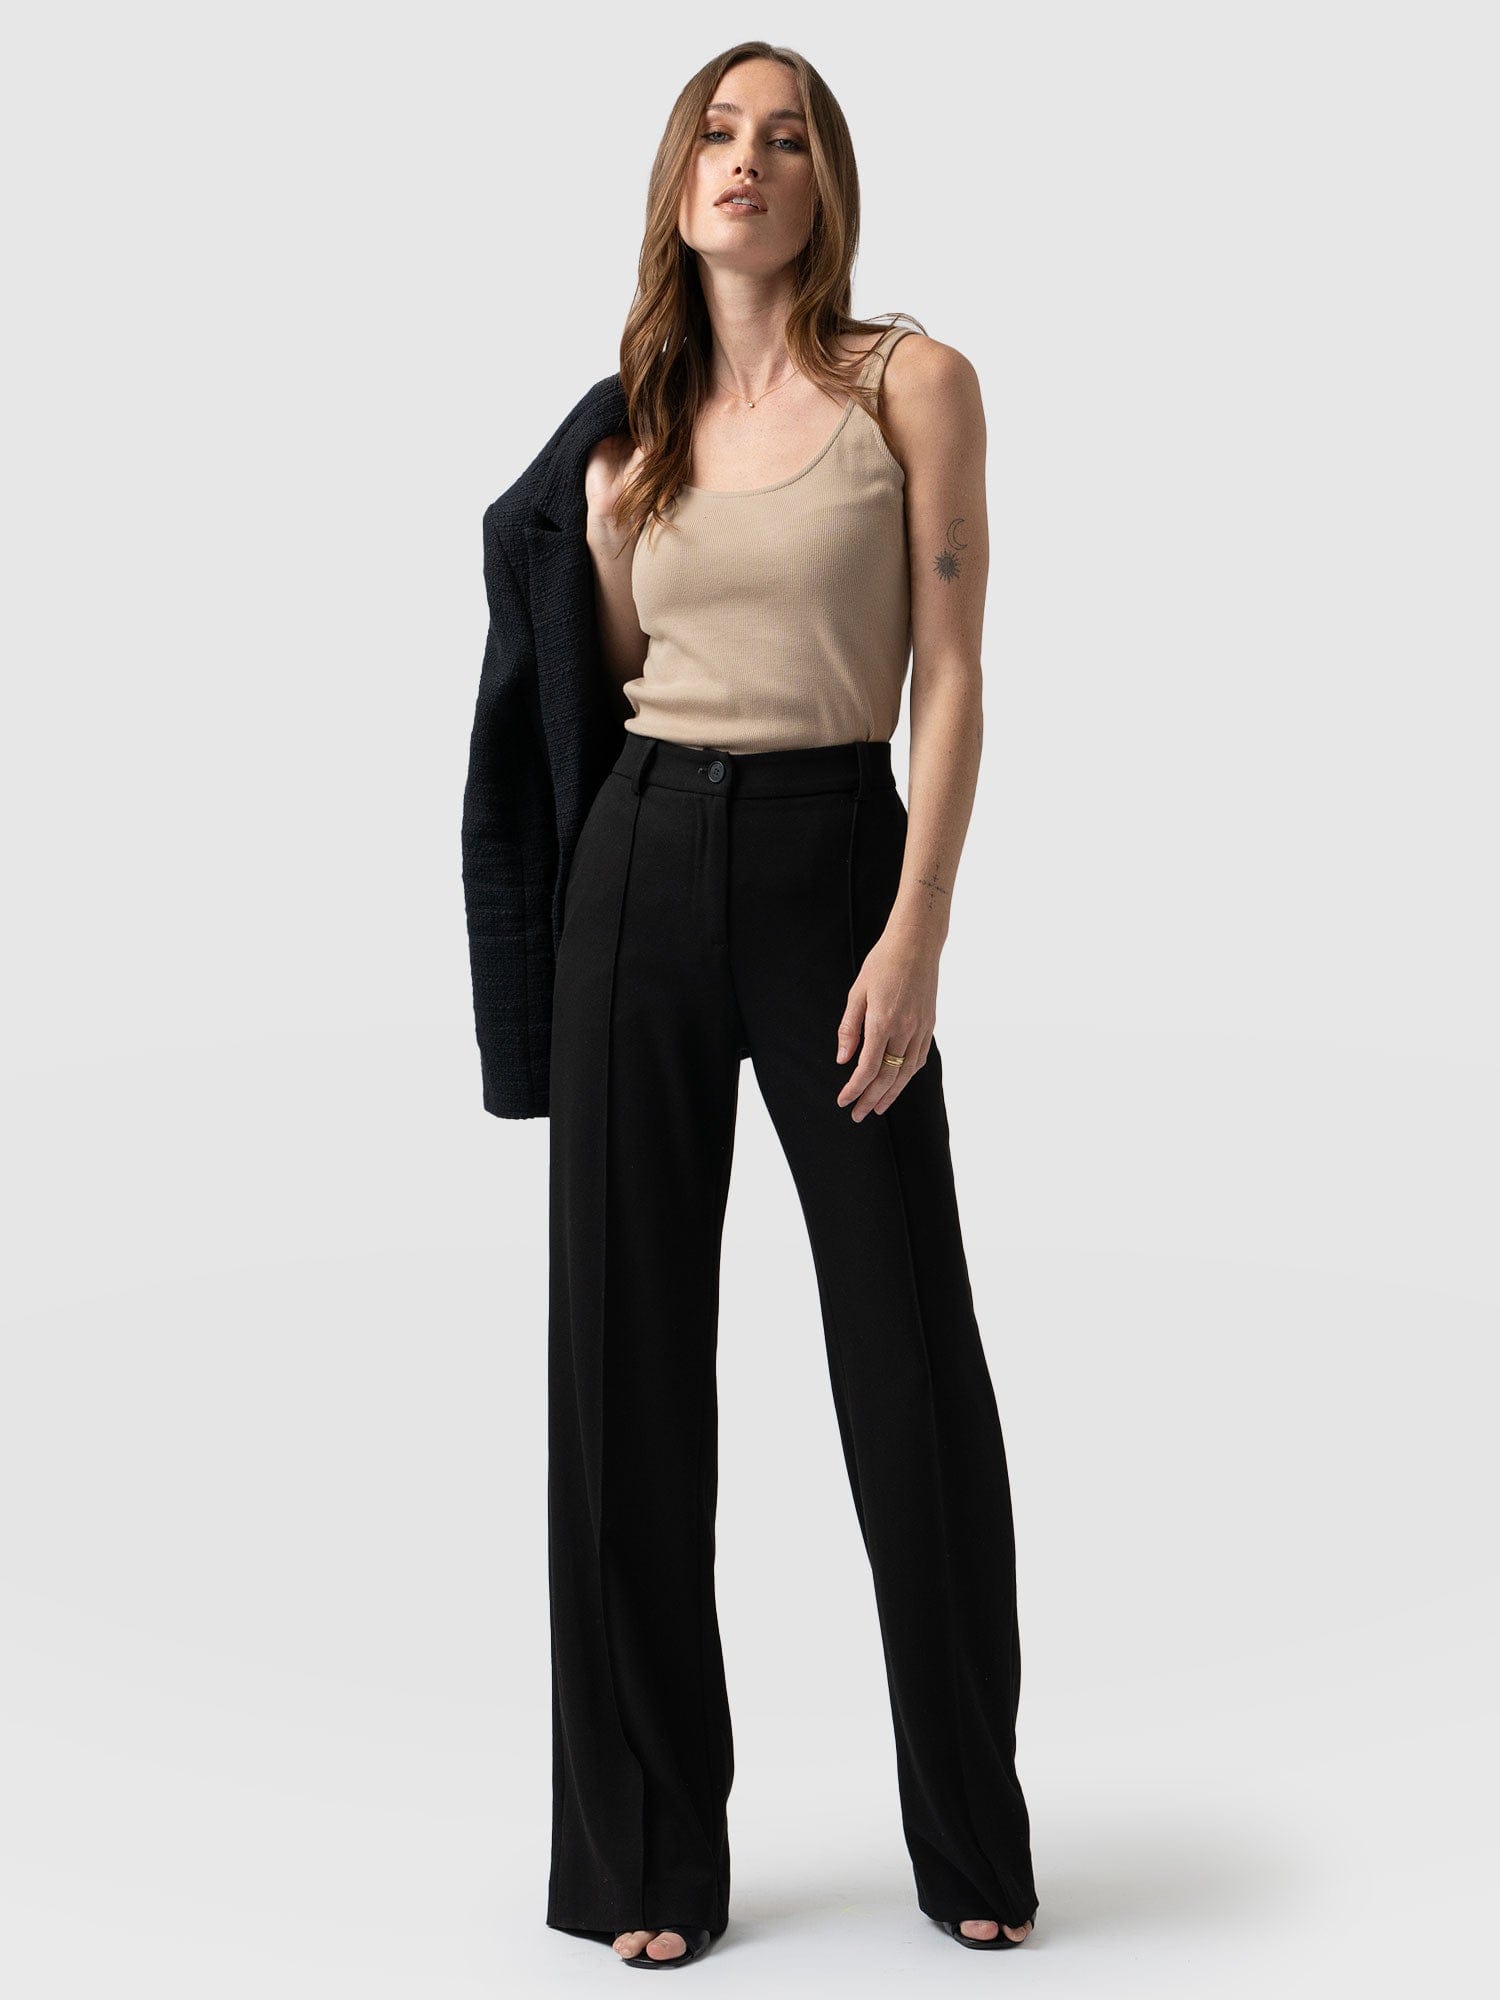 Women Office Trousers Formal Tailored Straight & Skinny Pants with Pocket  for Special Formal or Semi-Formal Occasion - Walmart.com